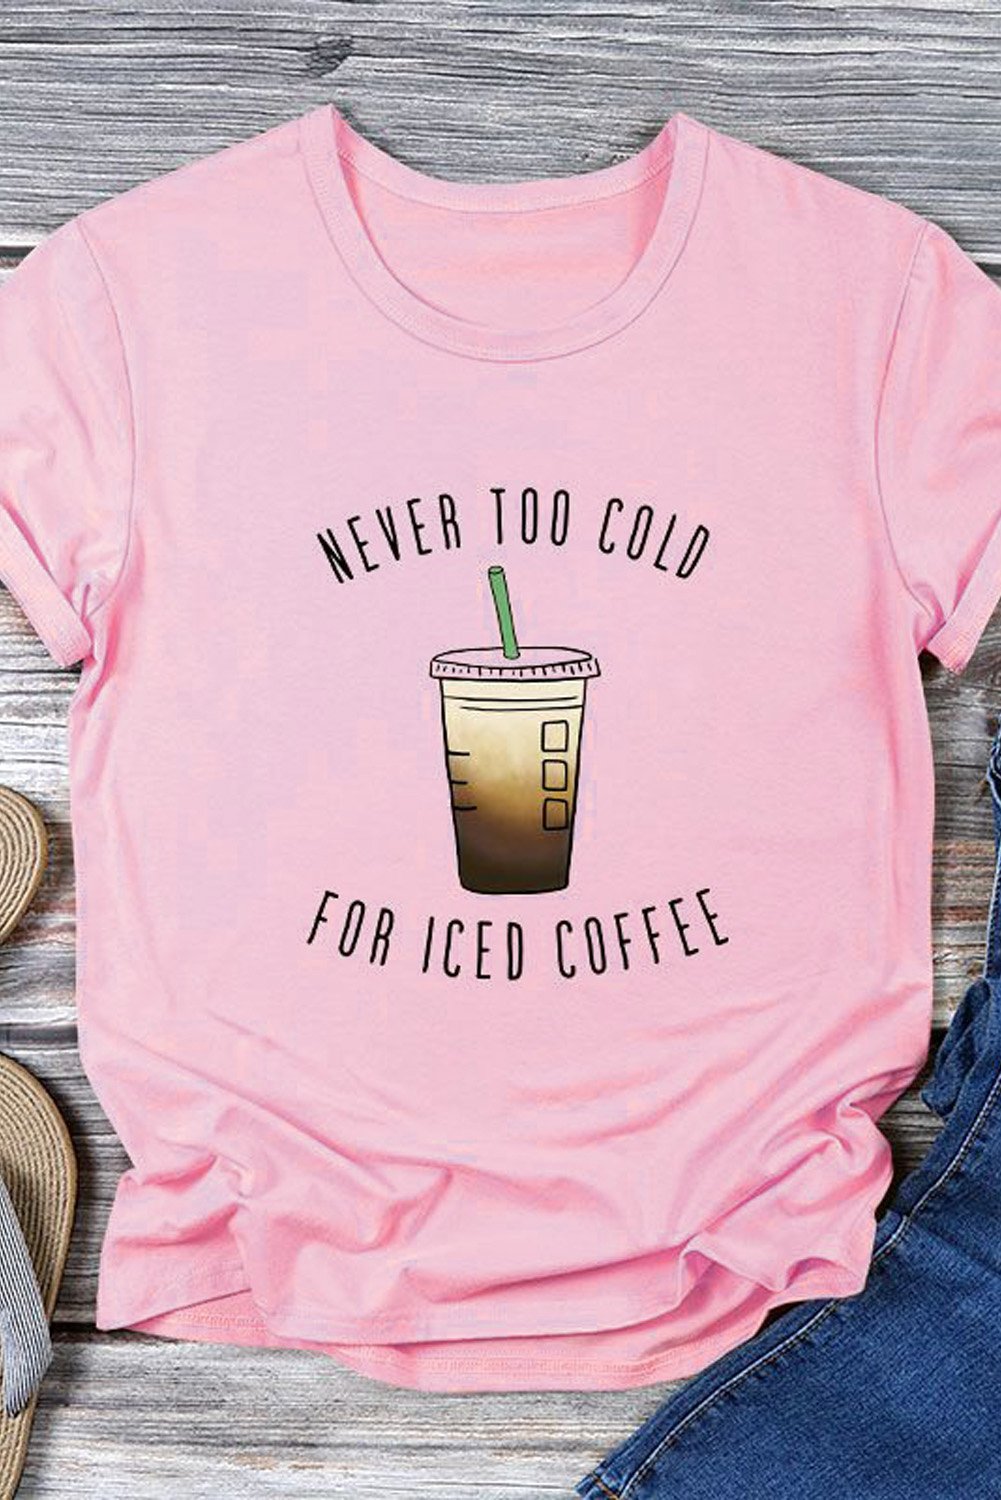 Cute Pink Short Sleeve NEVER TOO COLD FOR ICED COFFEE T-shirt